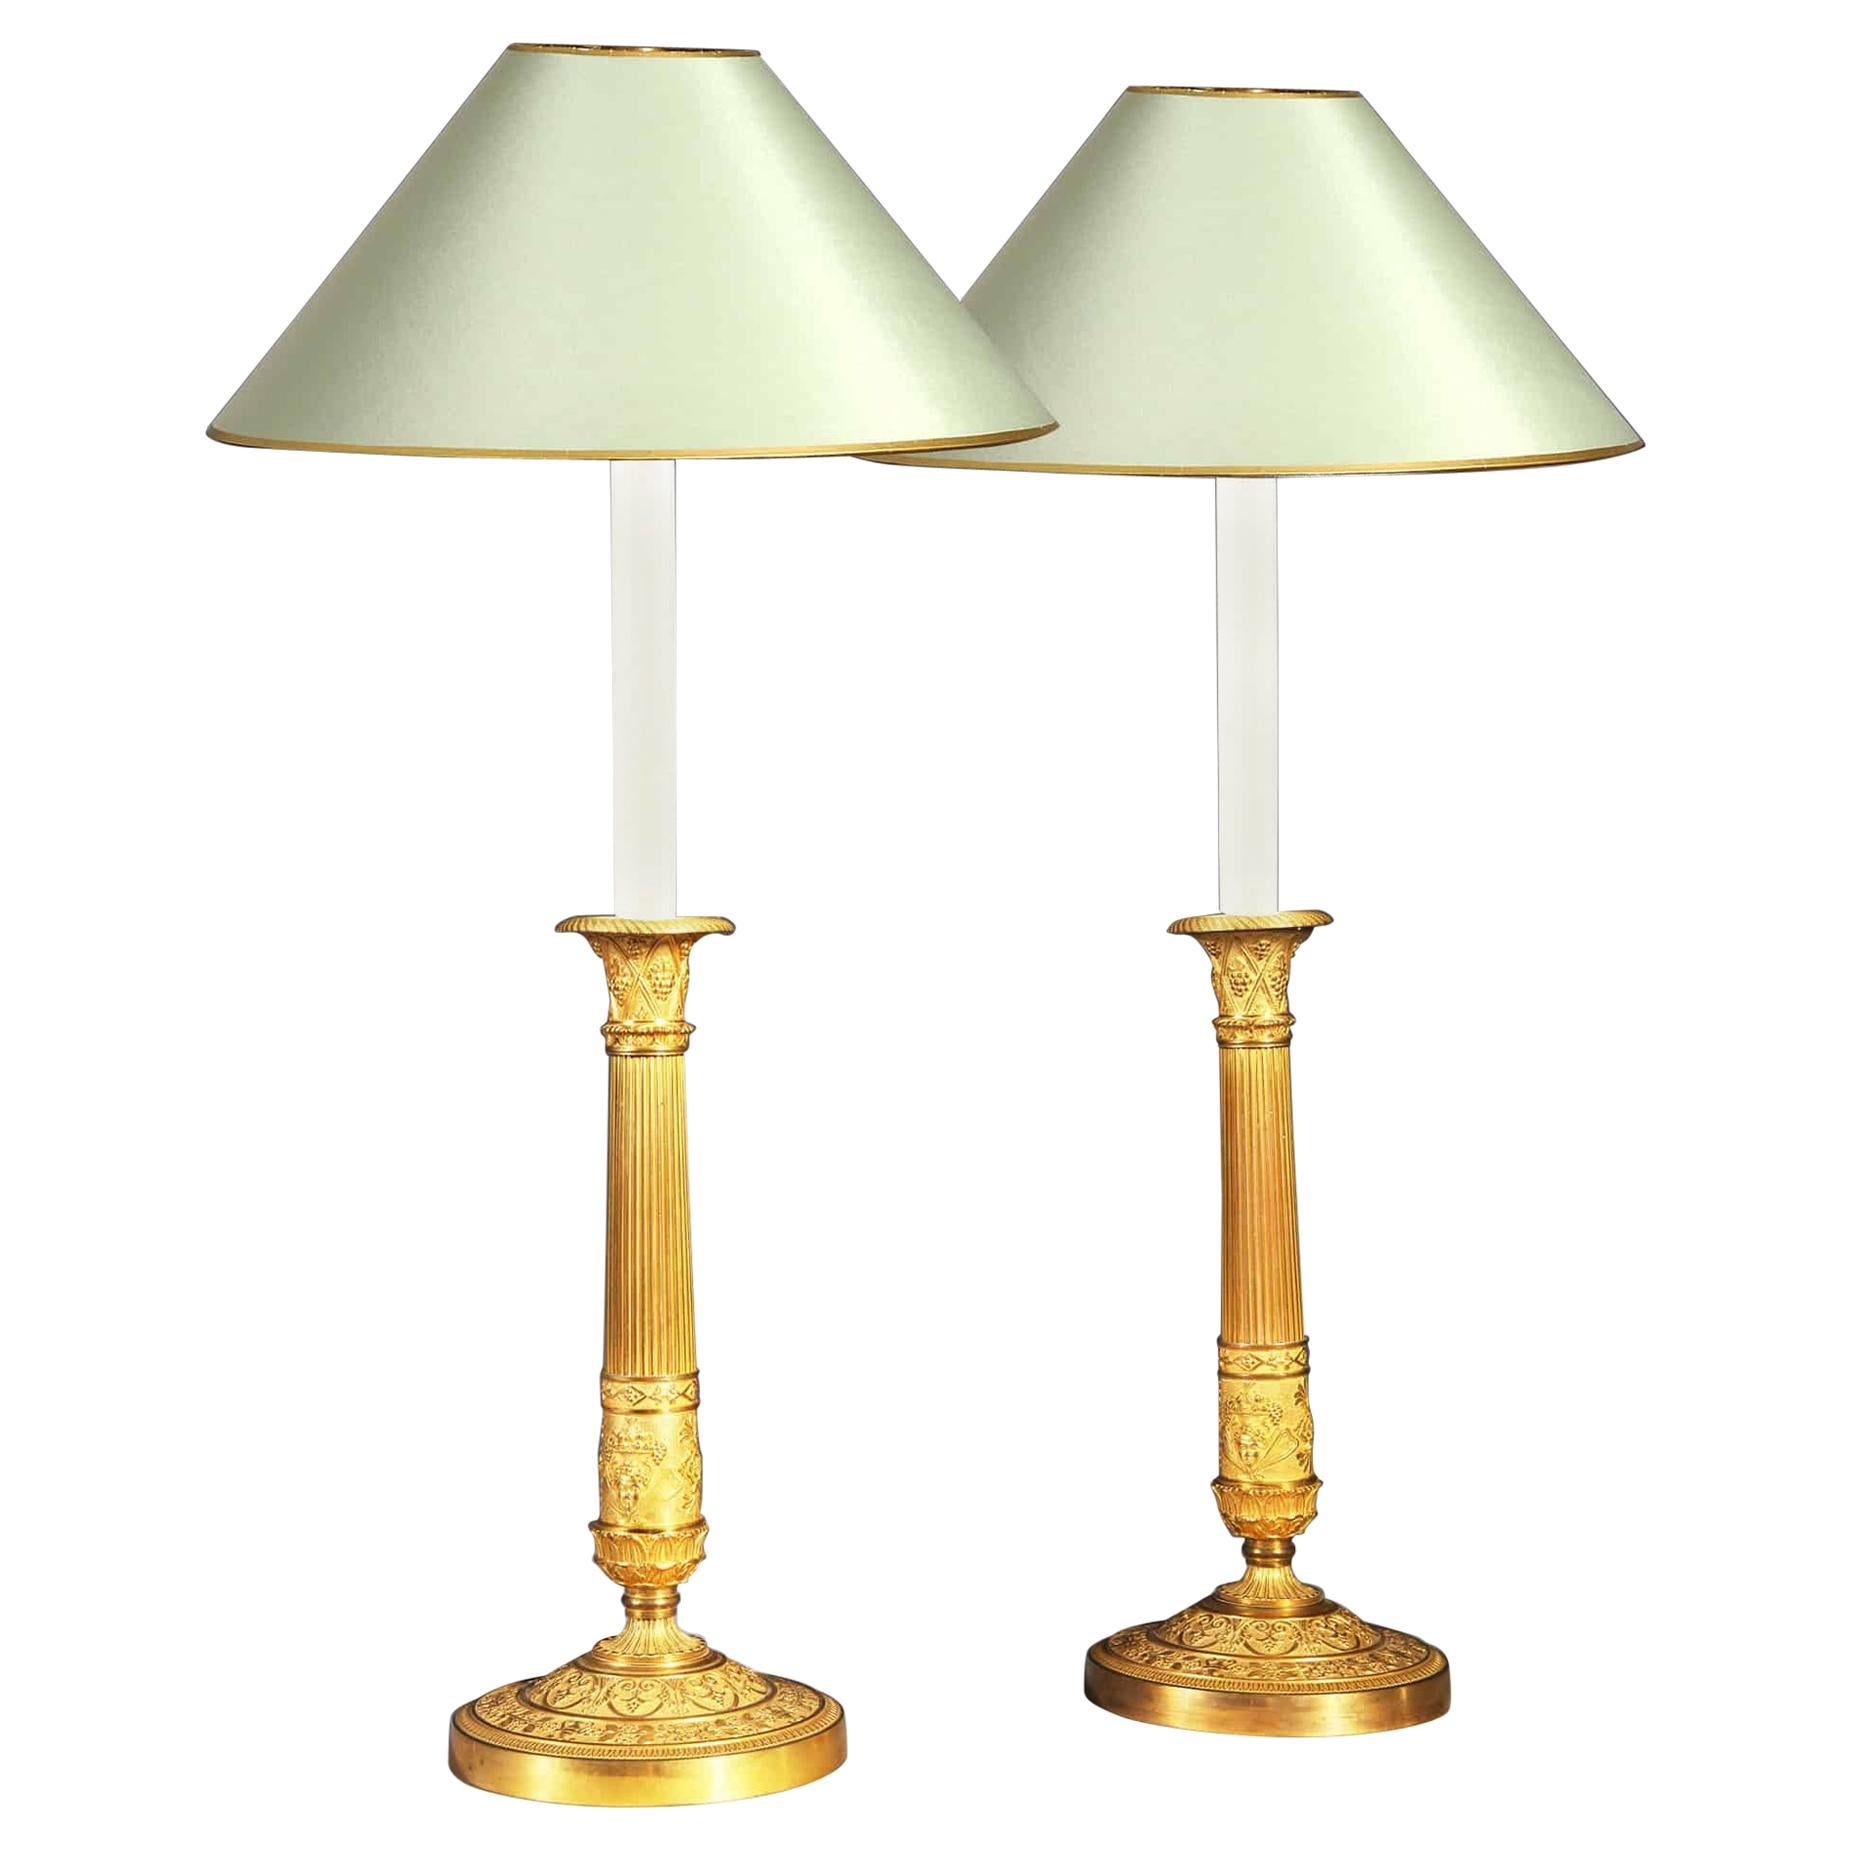 Pair of French Empire Candlesticks, Gilt Bronze Early 19th Century Desk Lamps